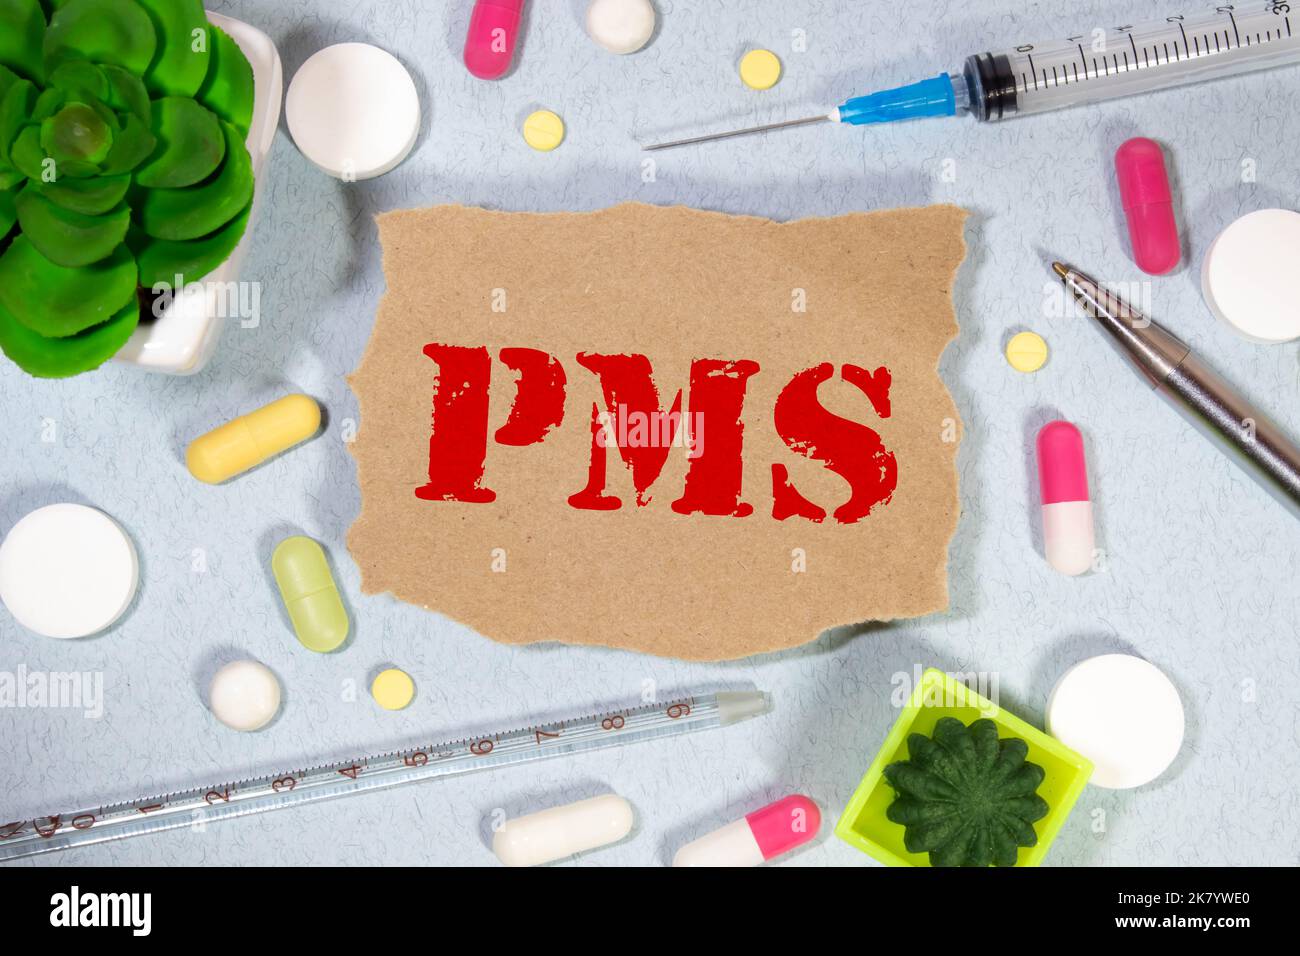 The words pms, is written on white paper on yellow background Stock Photo